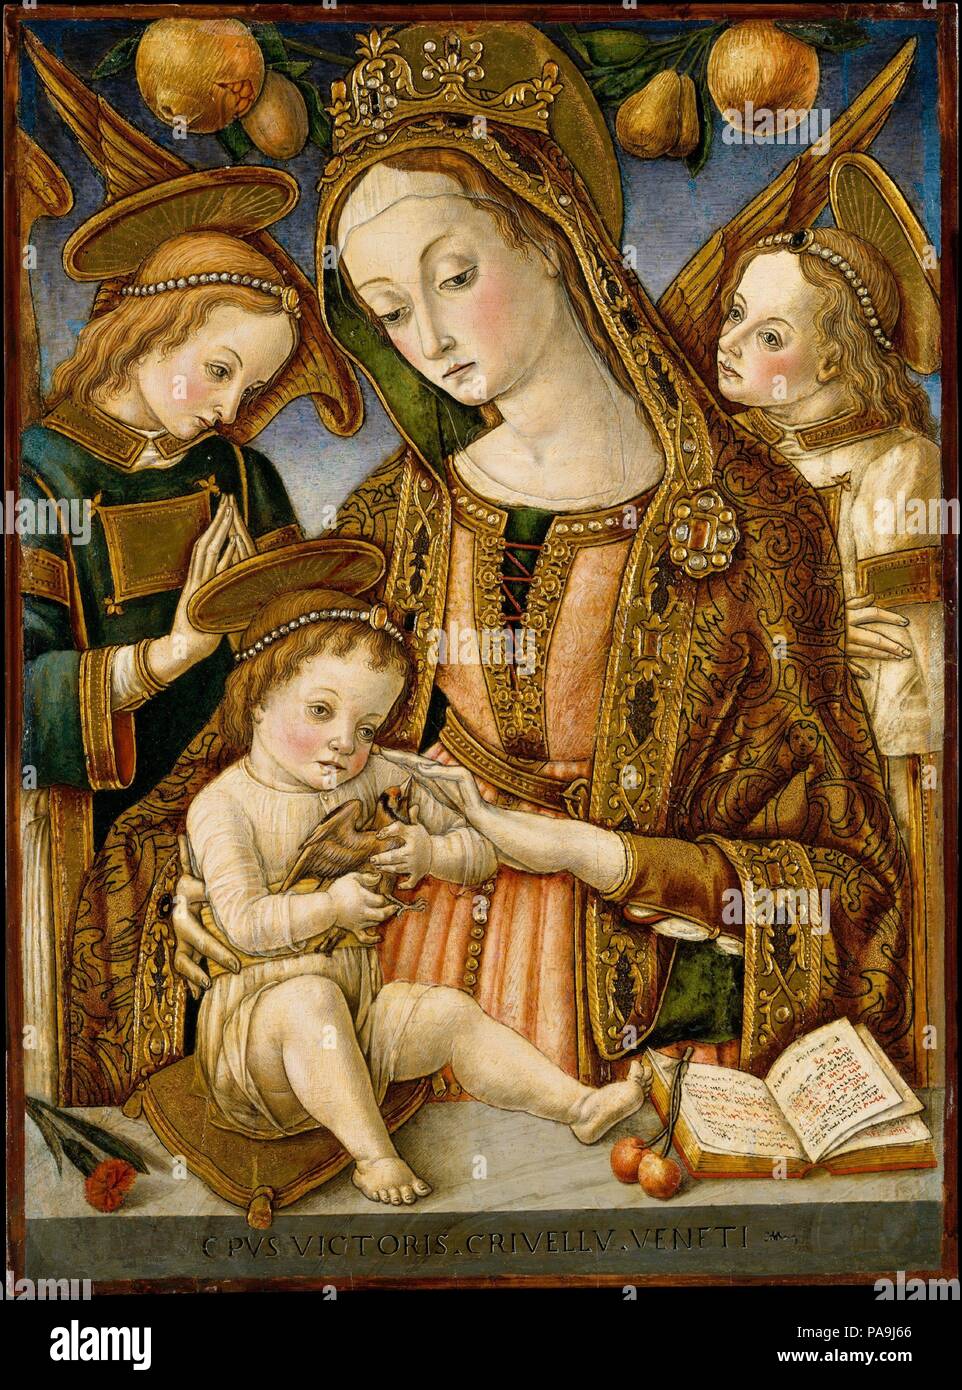 Madonna and Child with Two Angels. Artist: Vittore Crivelli (Italian, Venice, active by 1465-died 1501/2 Fermo). Dimensions: 21 7/8 x 16 in. (55.6 x 40.6 cm). Date: ca. 1481-82.  This charming Madonna and Child employs some of the same pictorial devices used by Vittore's brother Carlo, building up the gold to create three-dimensional embellishments. The parapet is inscribed with Vittore's name and on it are placed a carnation (emblem of love), cherries (like the apple, symbol of original sin), and a devotional book. The Child holds a goldfinch, symbolic of the Passion of Jesus. Museum: Metropo Stock Photo